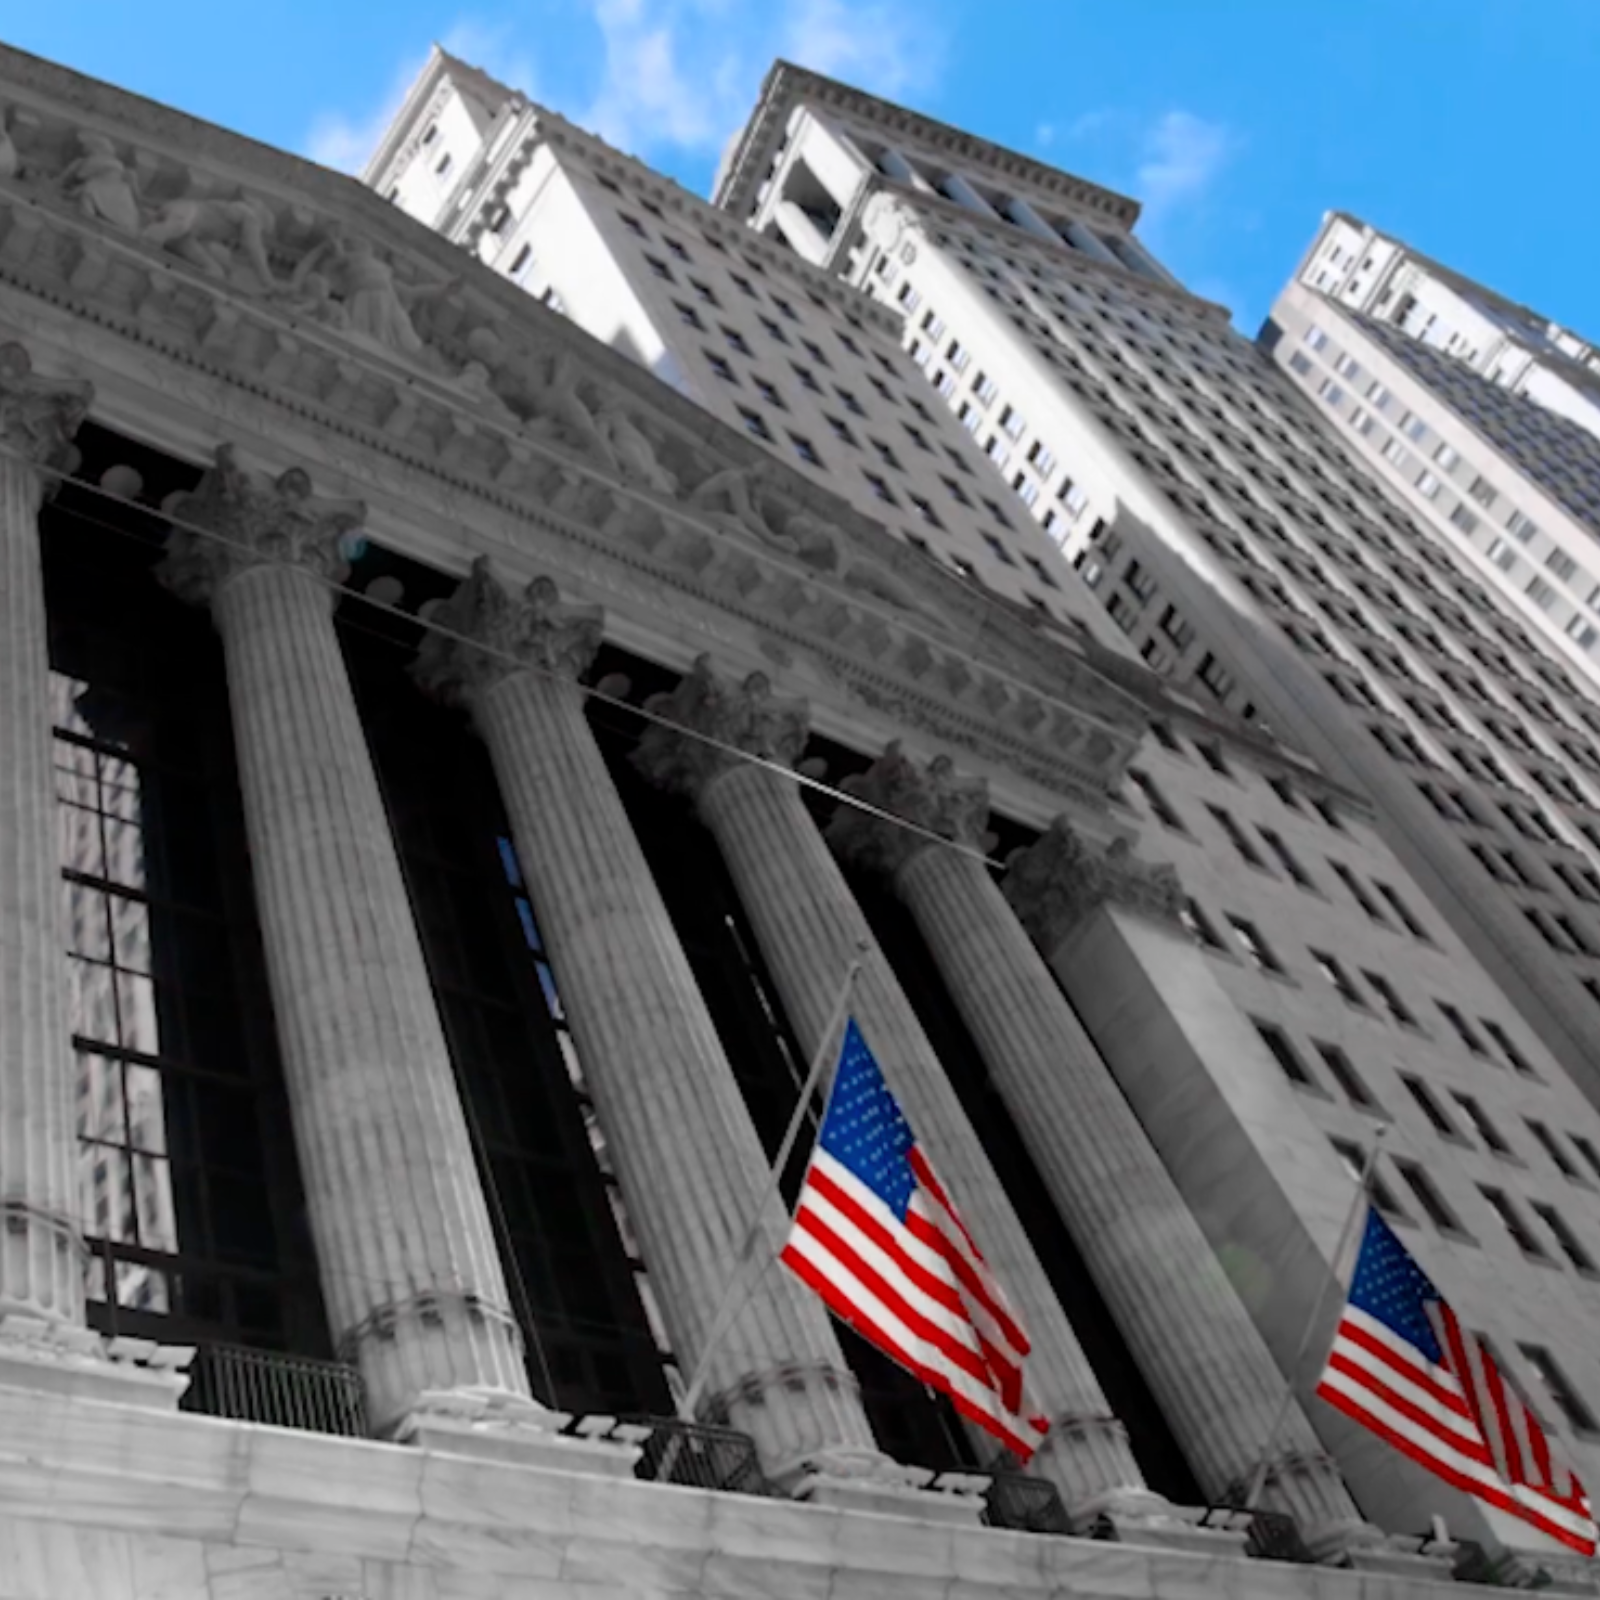 Operational Excellence at the New York Stock Exchange: Our Q&A with NYSE’s President